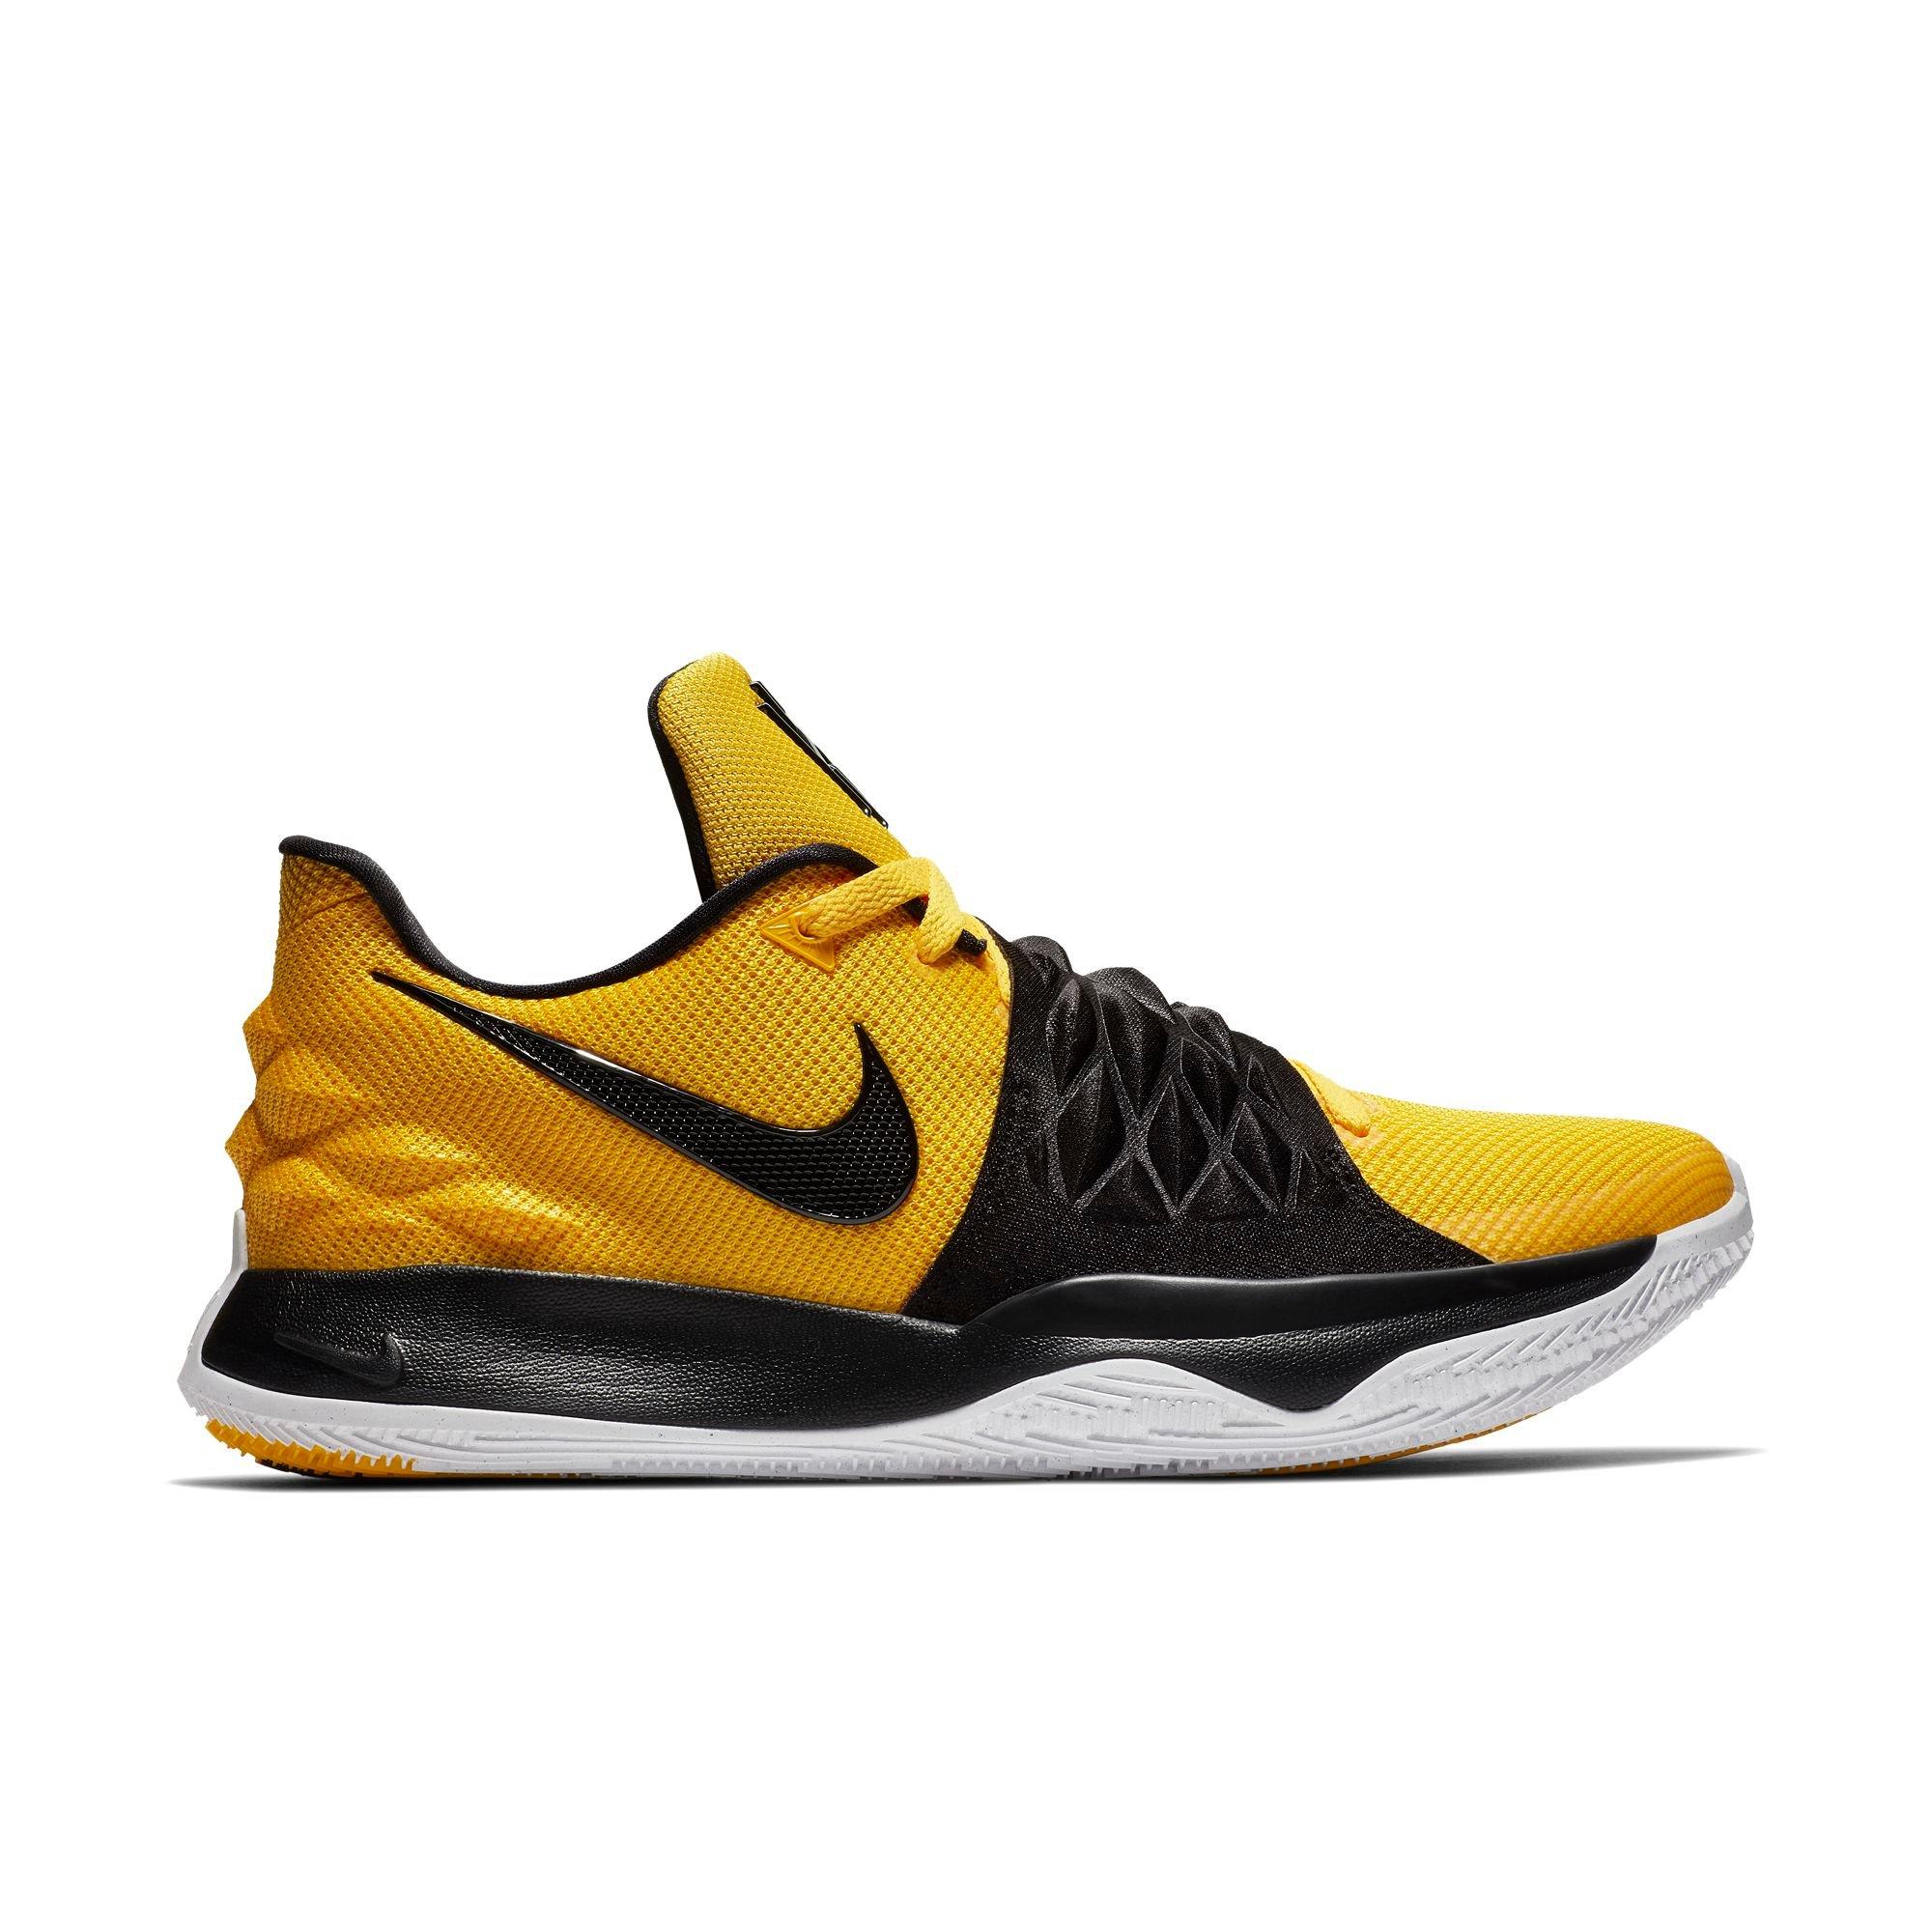 kyrie irving amarillo